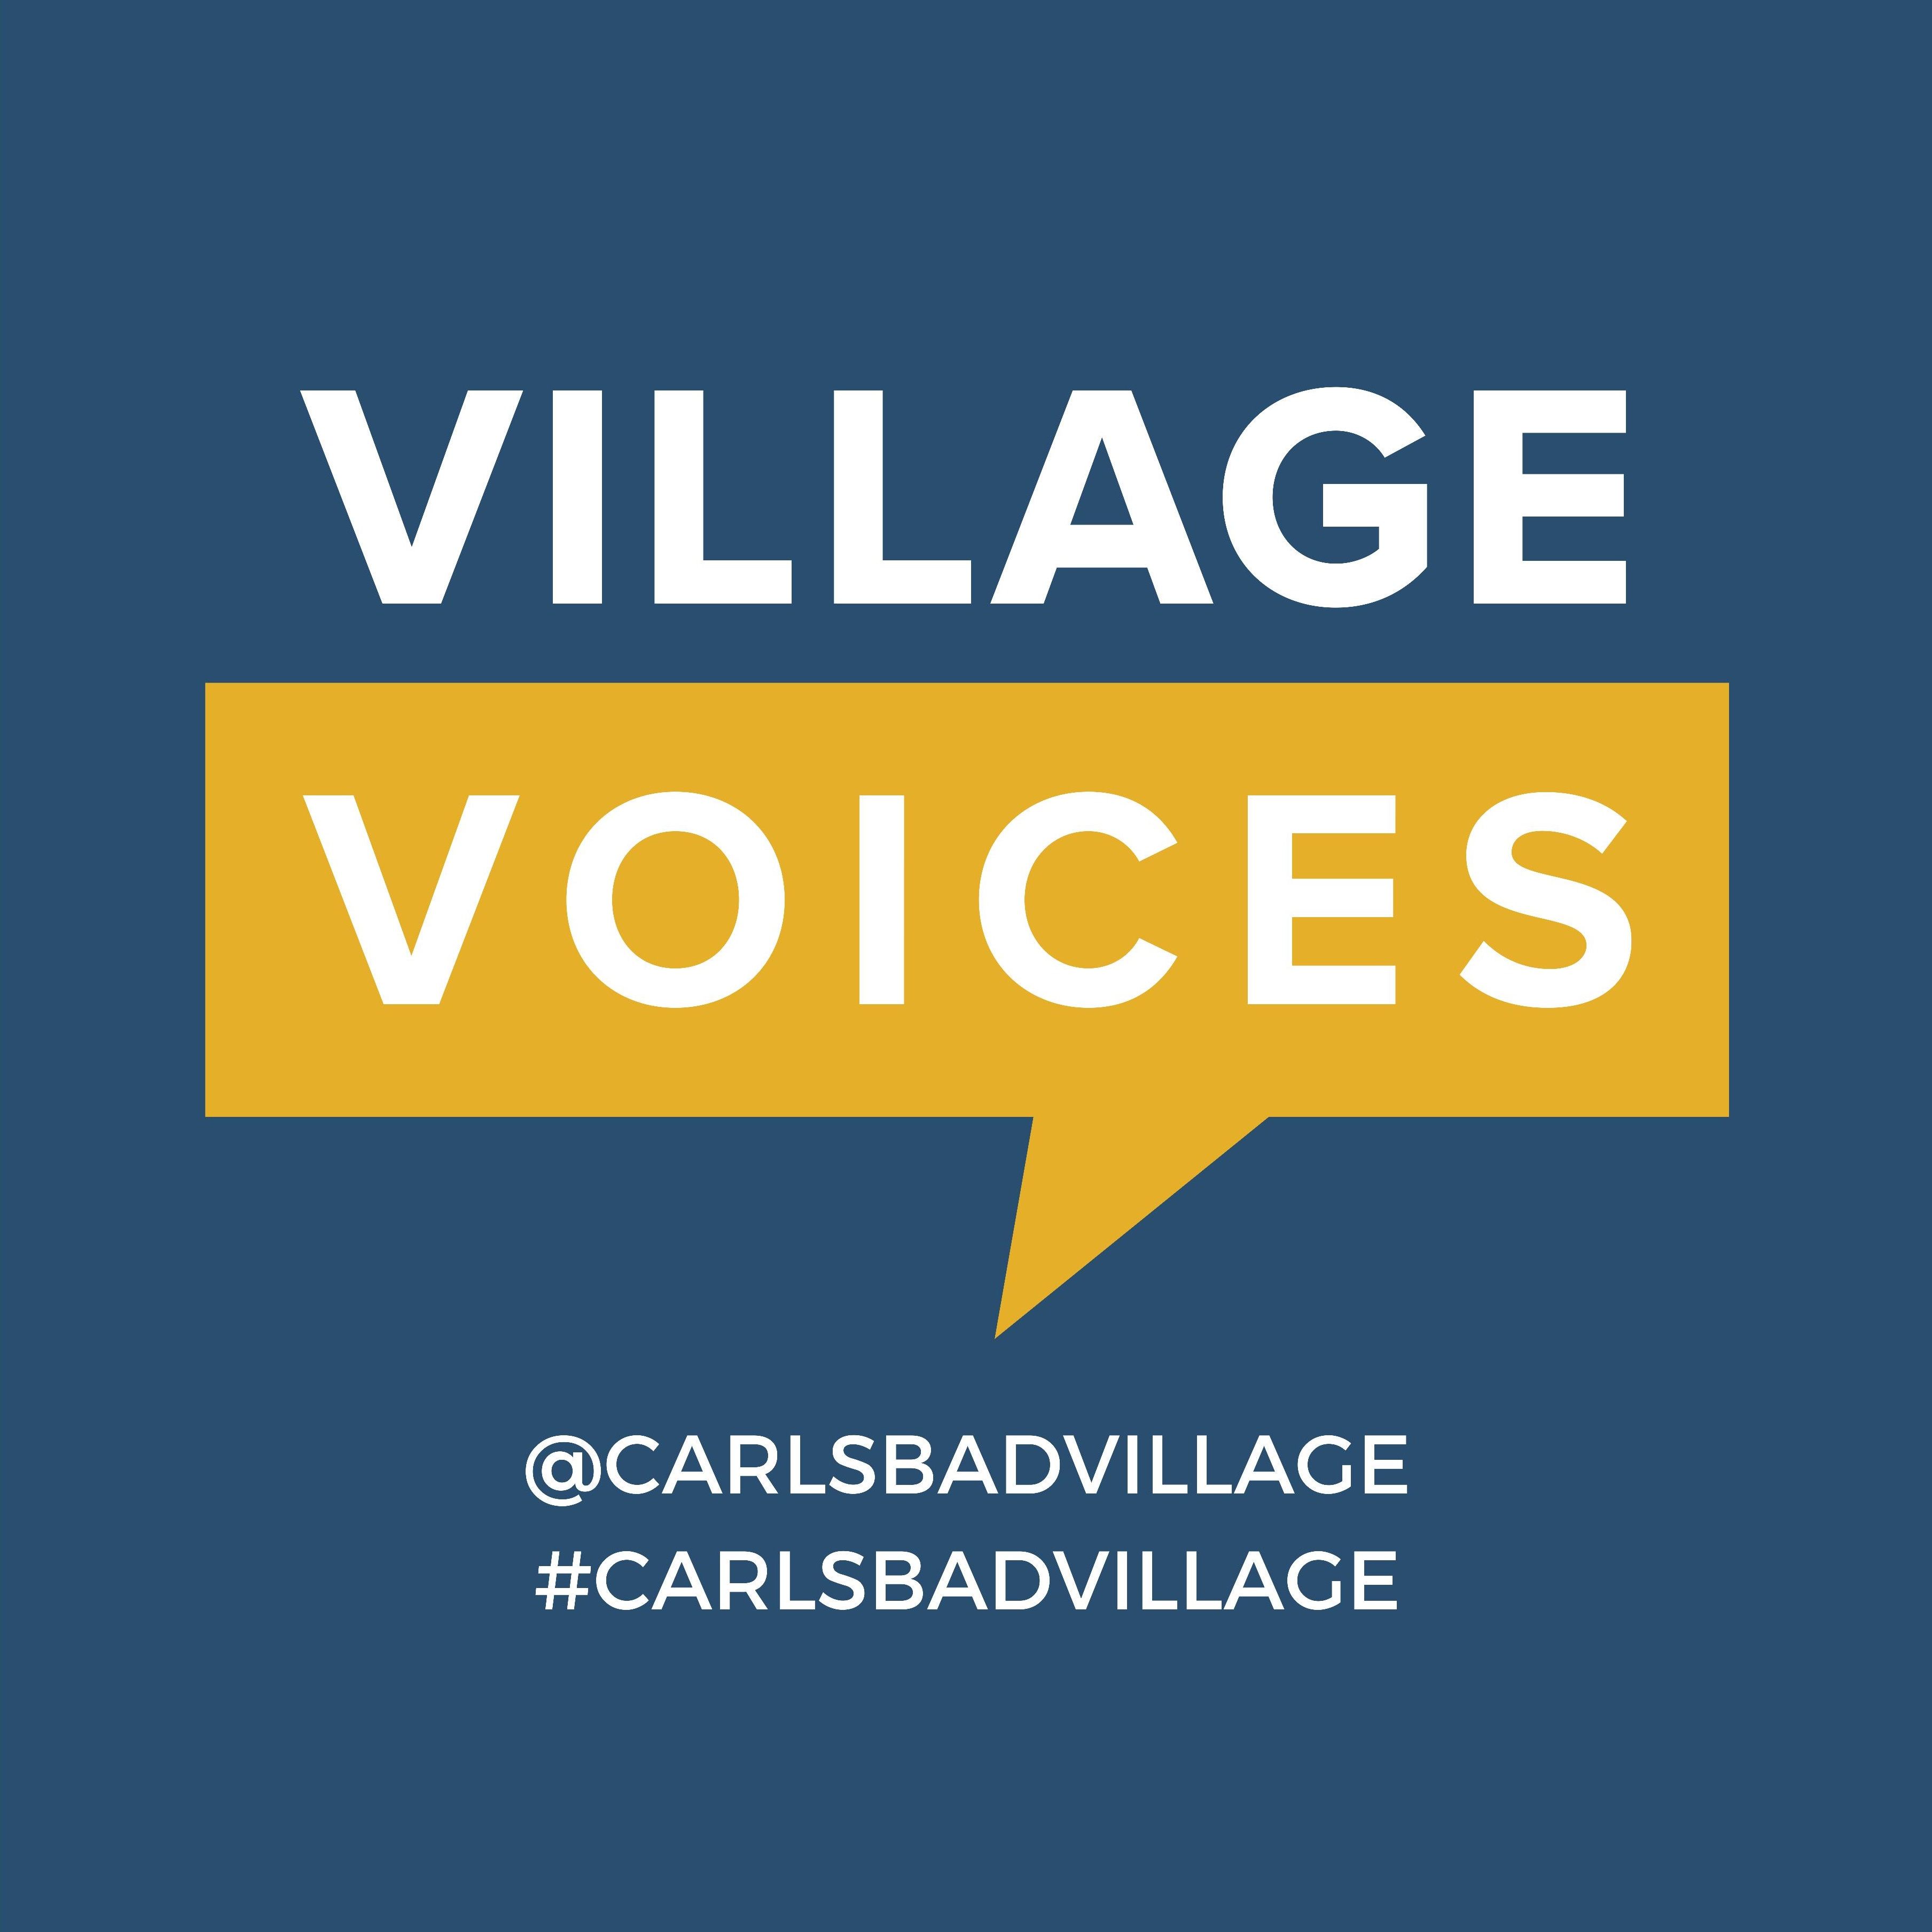 Come Experience An Entirely New Village Voices May 9th